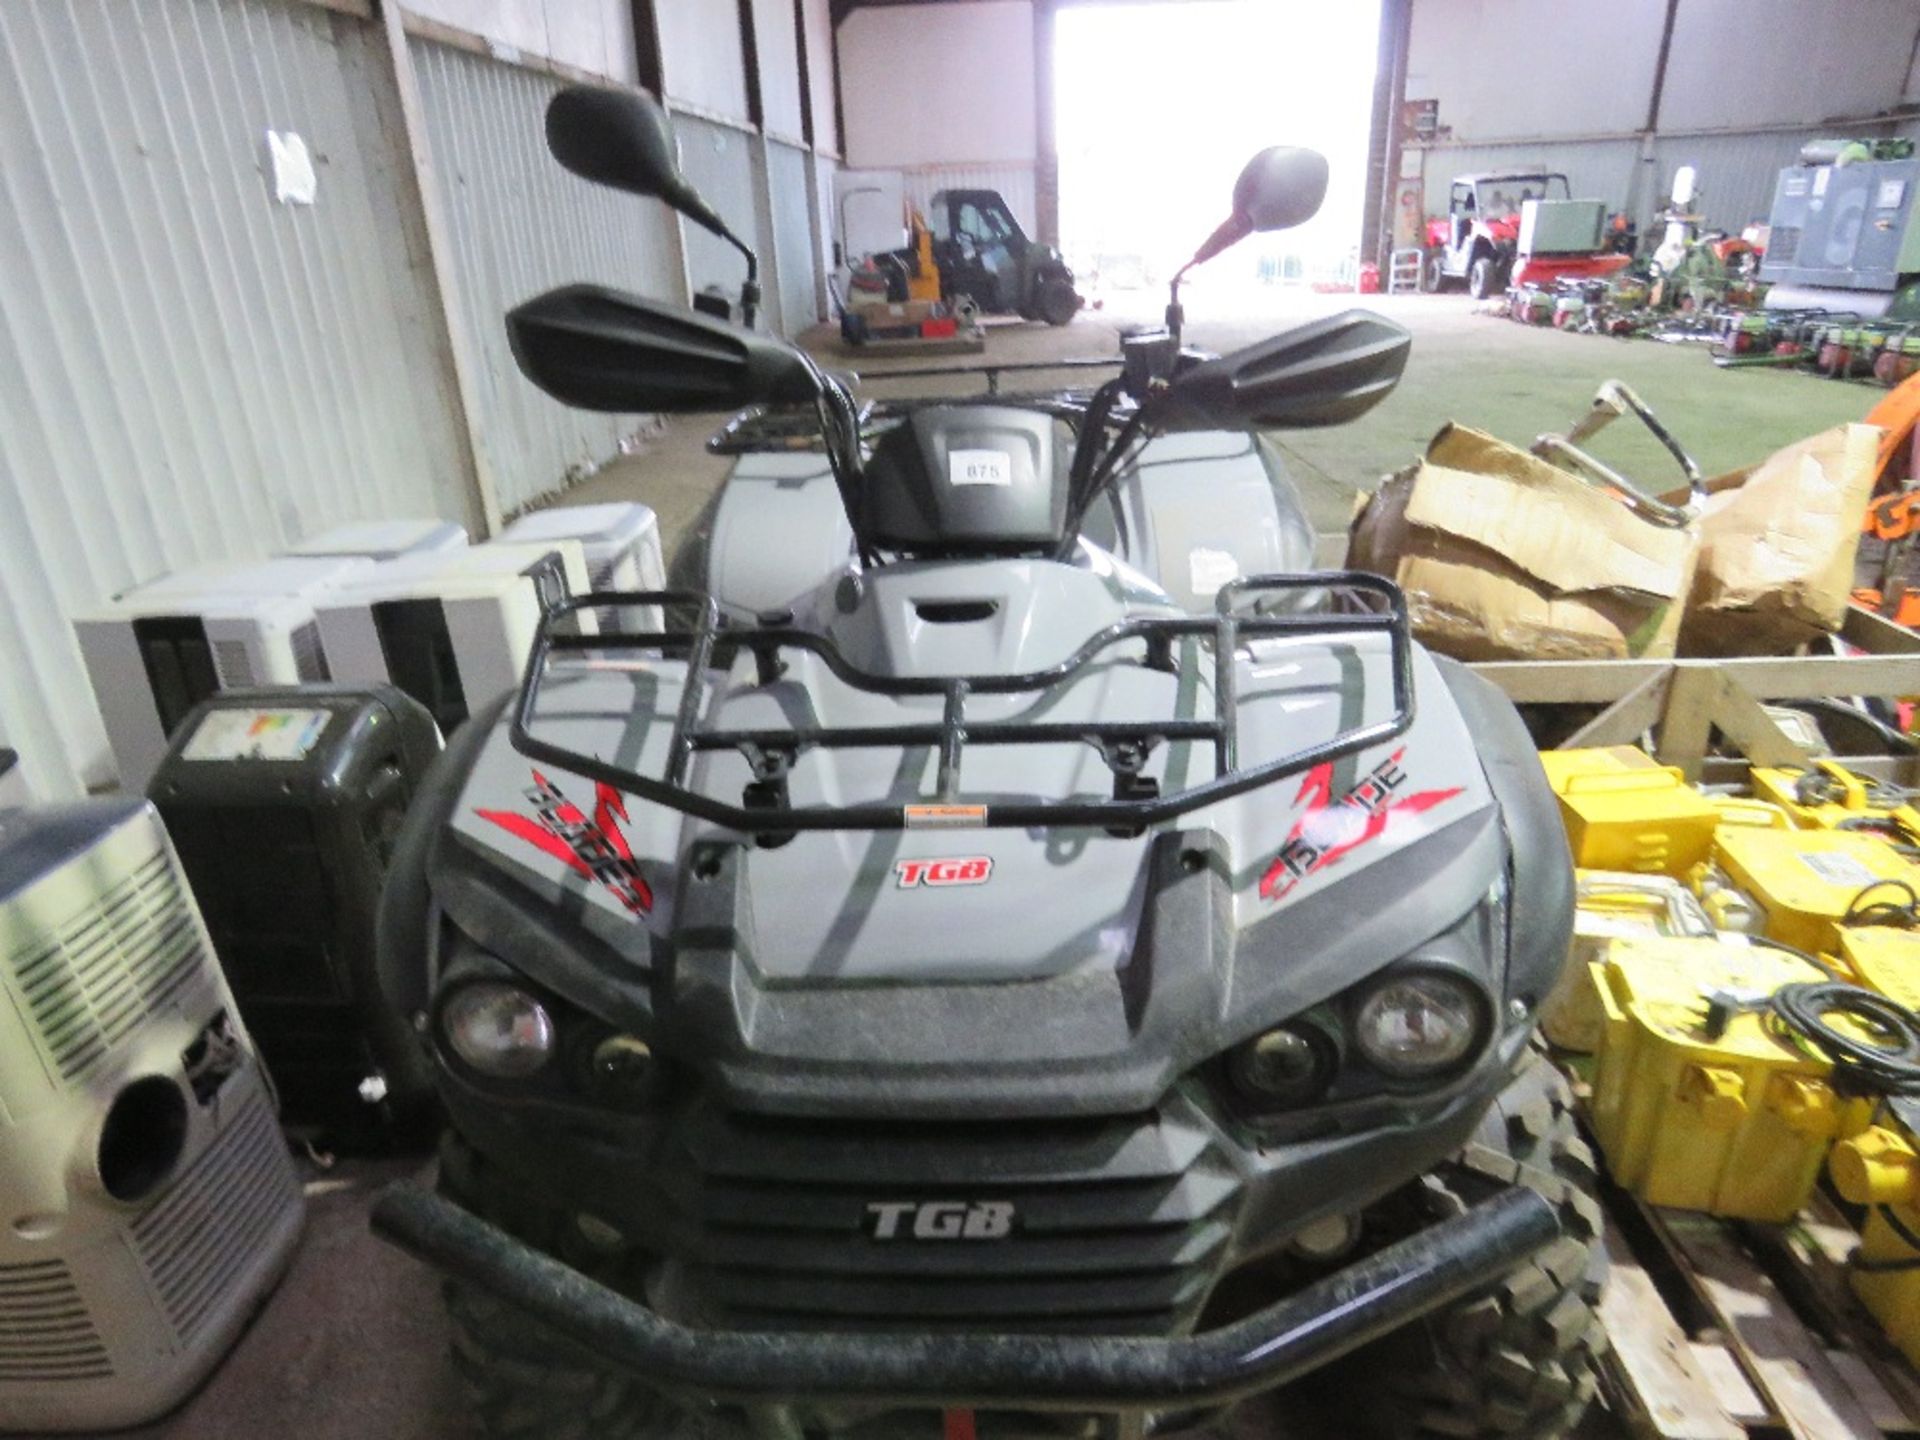 TGB BLADE 520SL EPS 4WD QUAD BIKE, 164 REC MILES FROM NEW. REG:LG72 MYO. WHEN TESTED WAS SEEN TO STA - Image 4 of 7